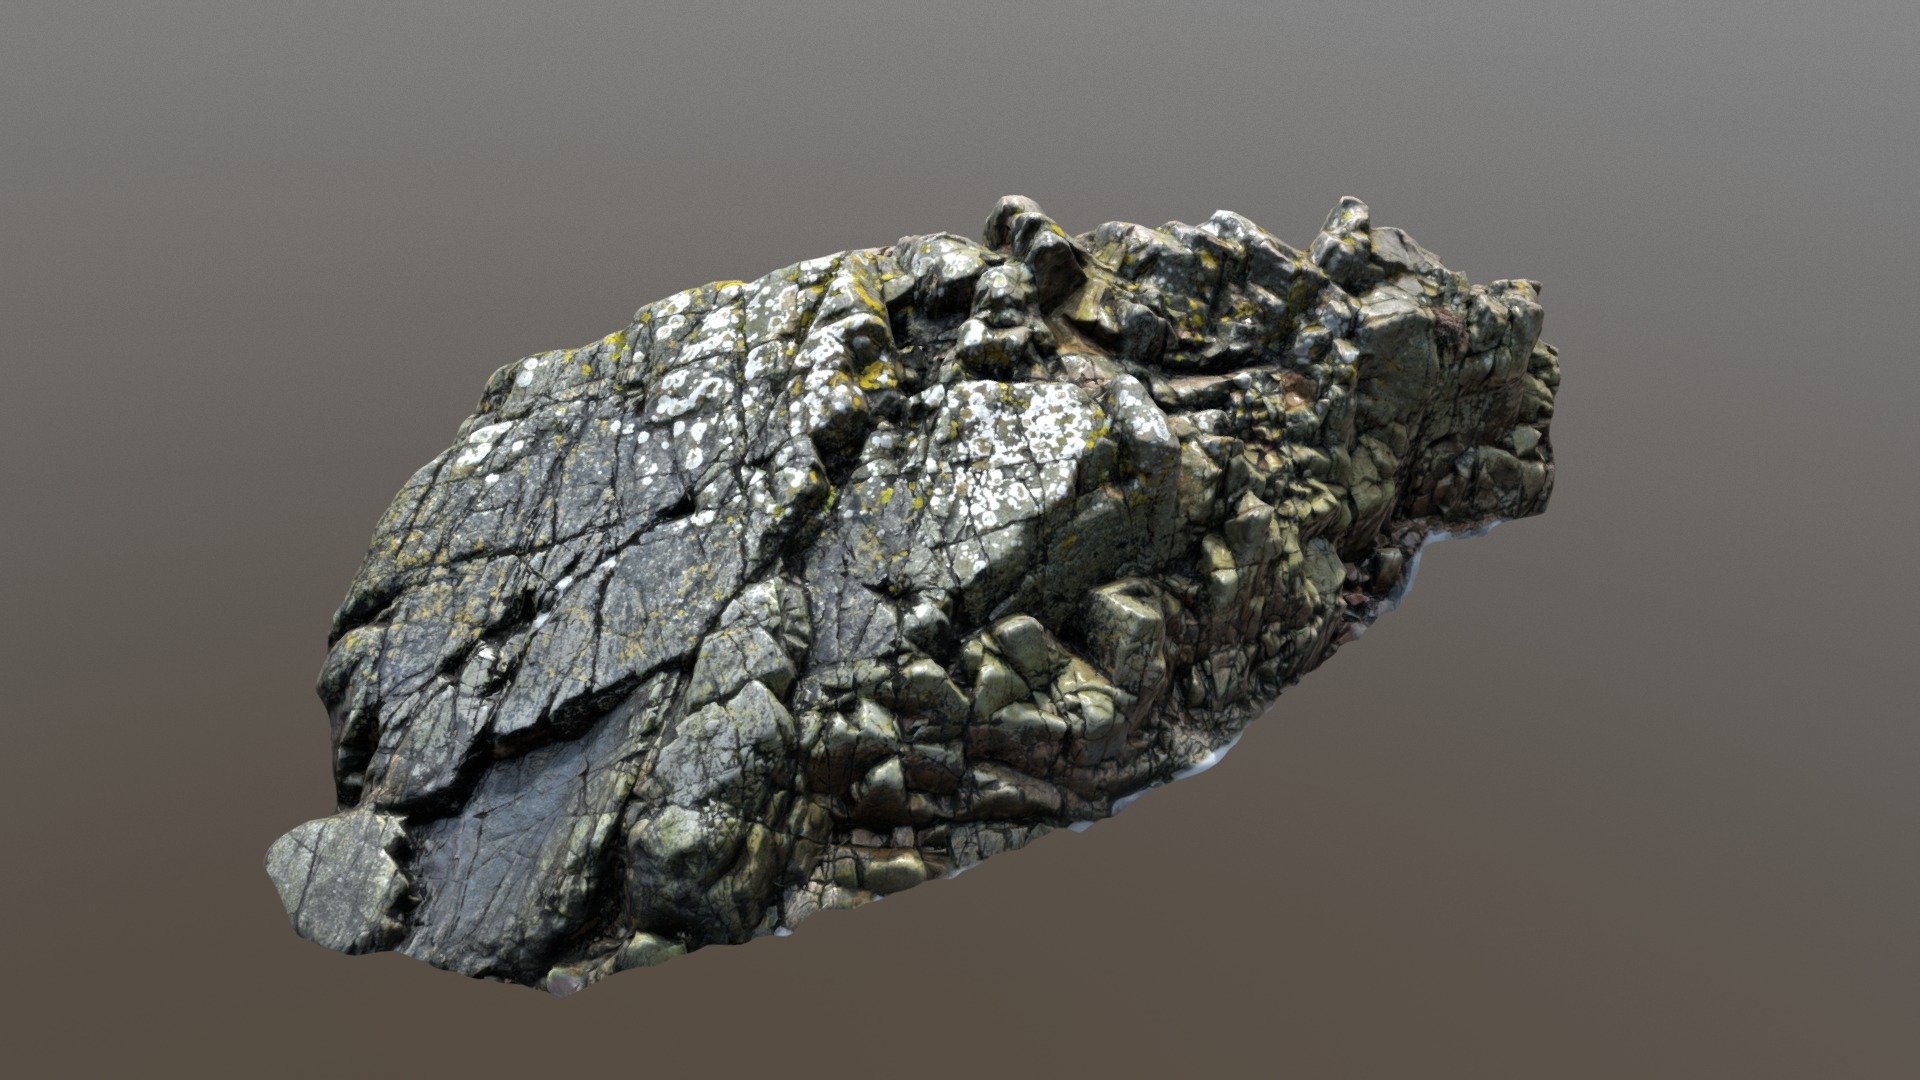 3d scanned rock cliff J

3d scanned cliff/ground - Nature Rock Cliff J - Buy Royalty Free 3D model by 3drille 3d model